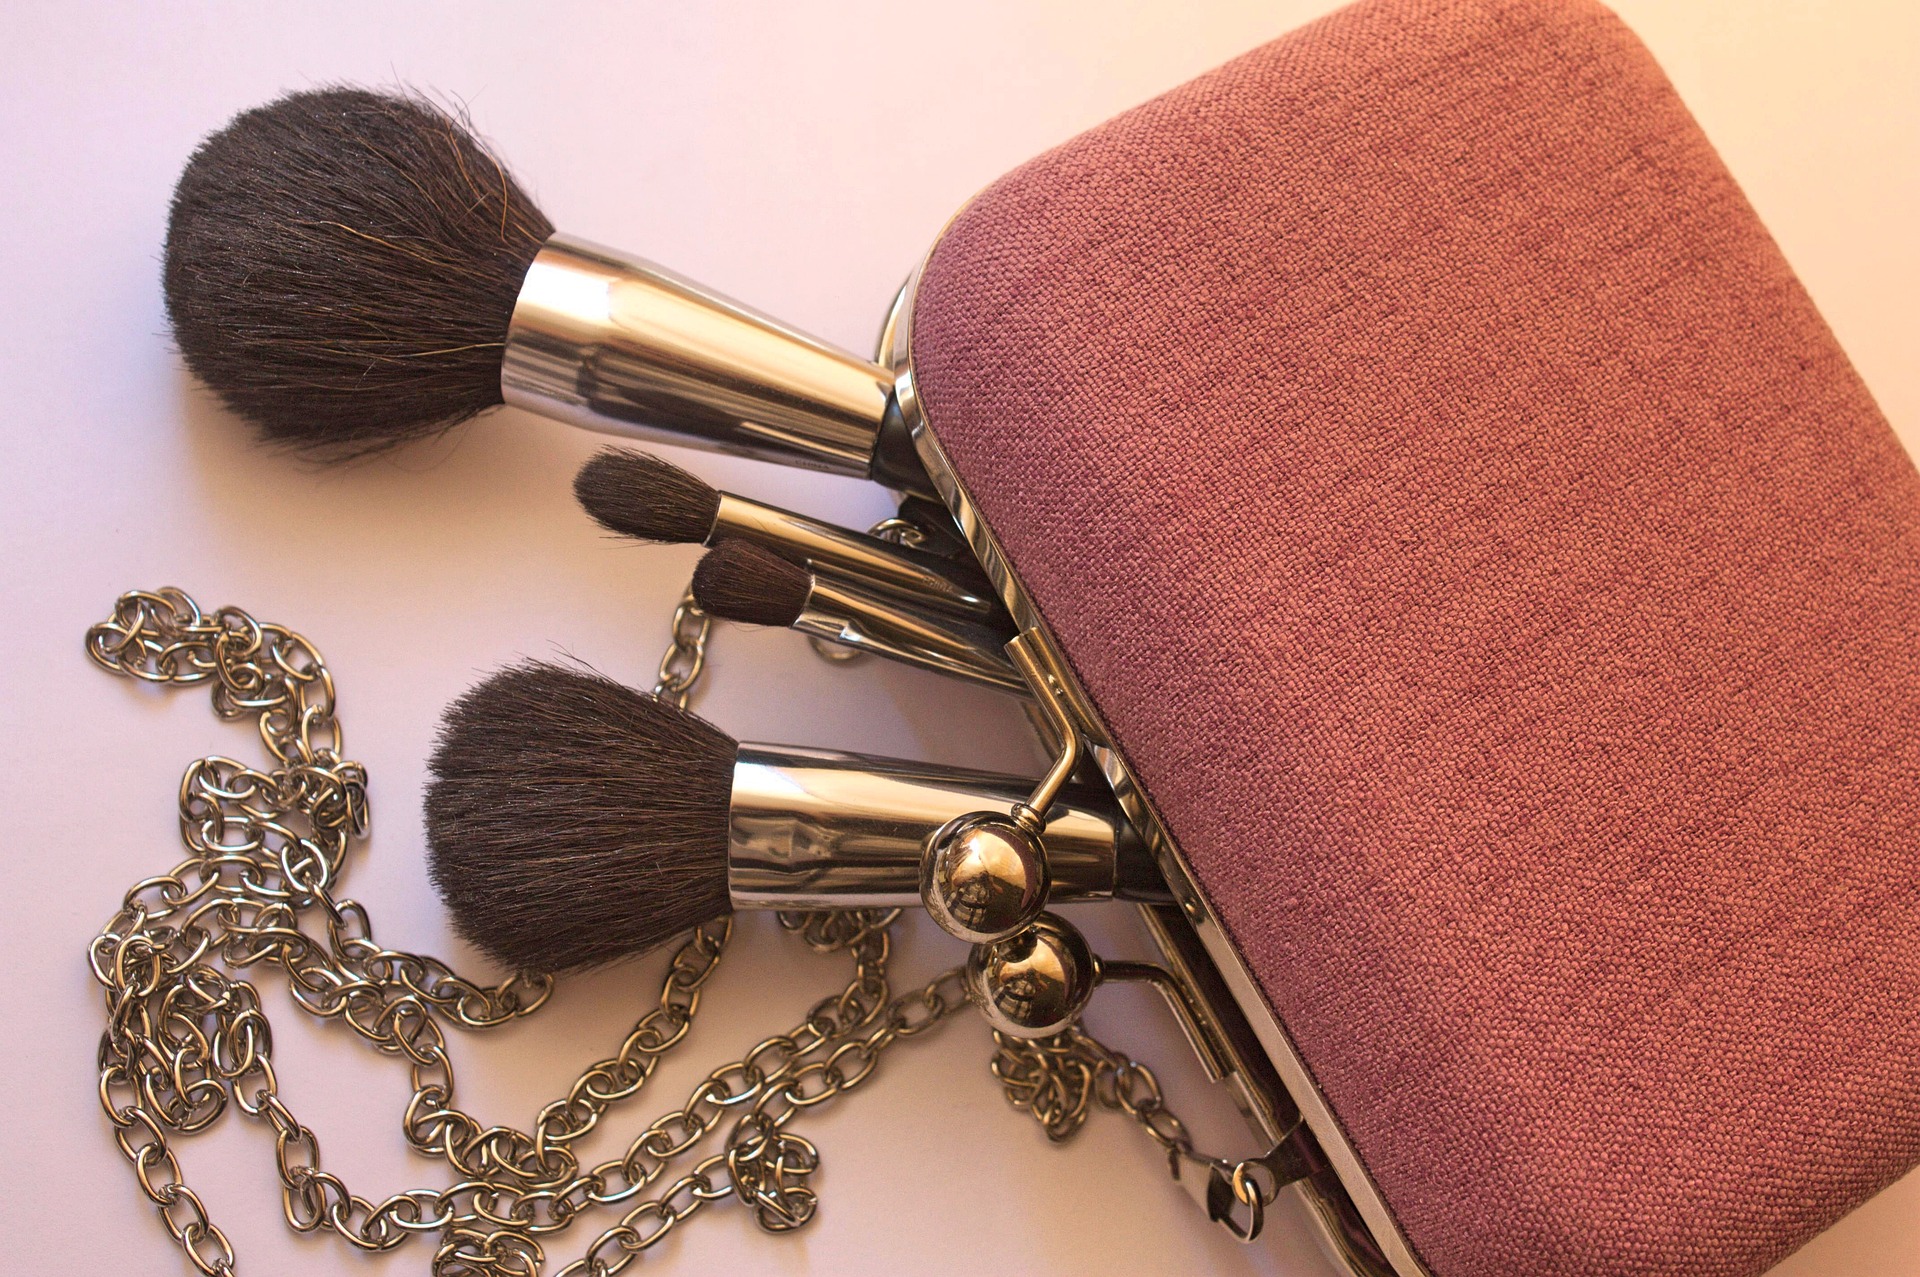 Makeup Brushes Dirtier Than Toilet Seats, Researchers Confirm